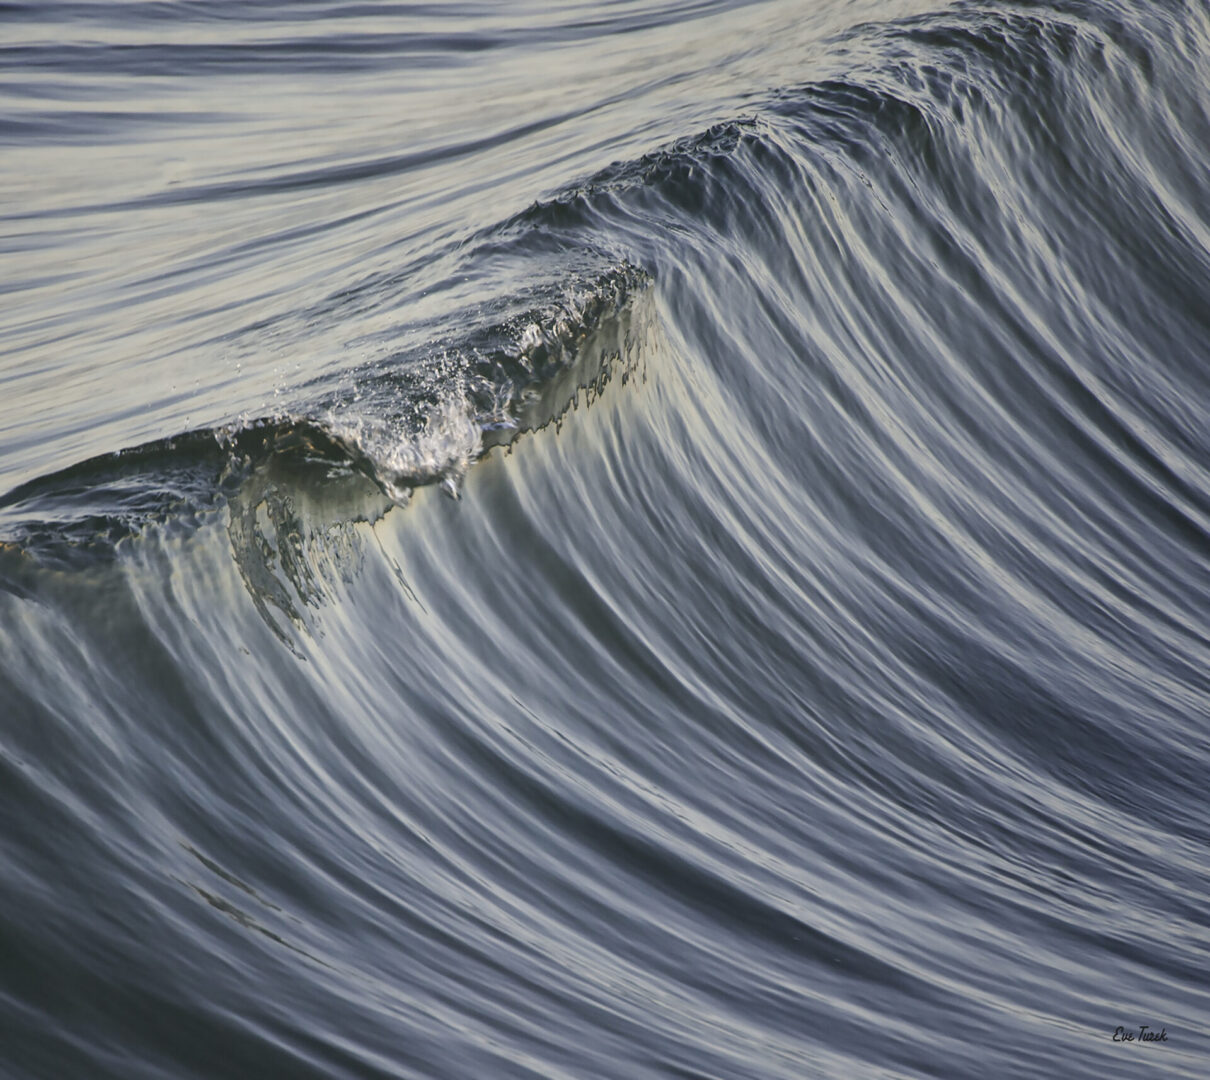 A photo of waves